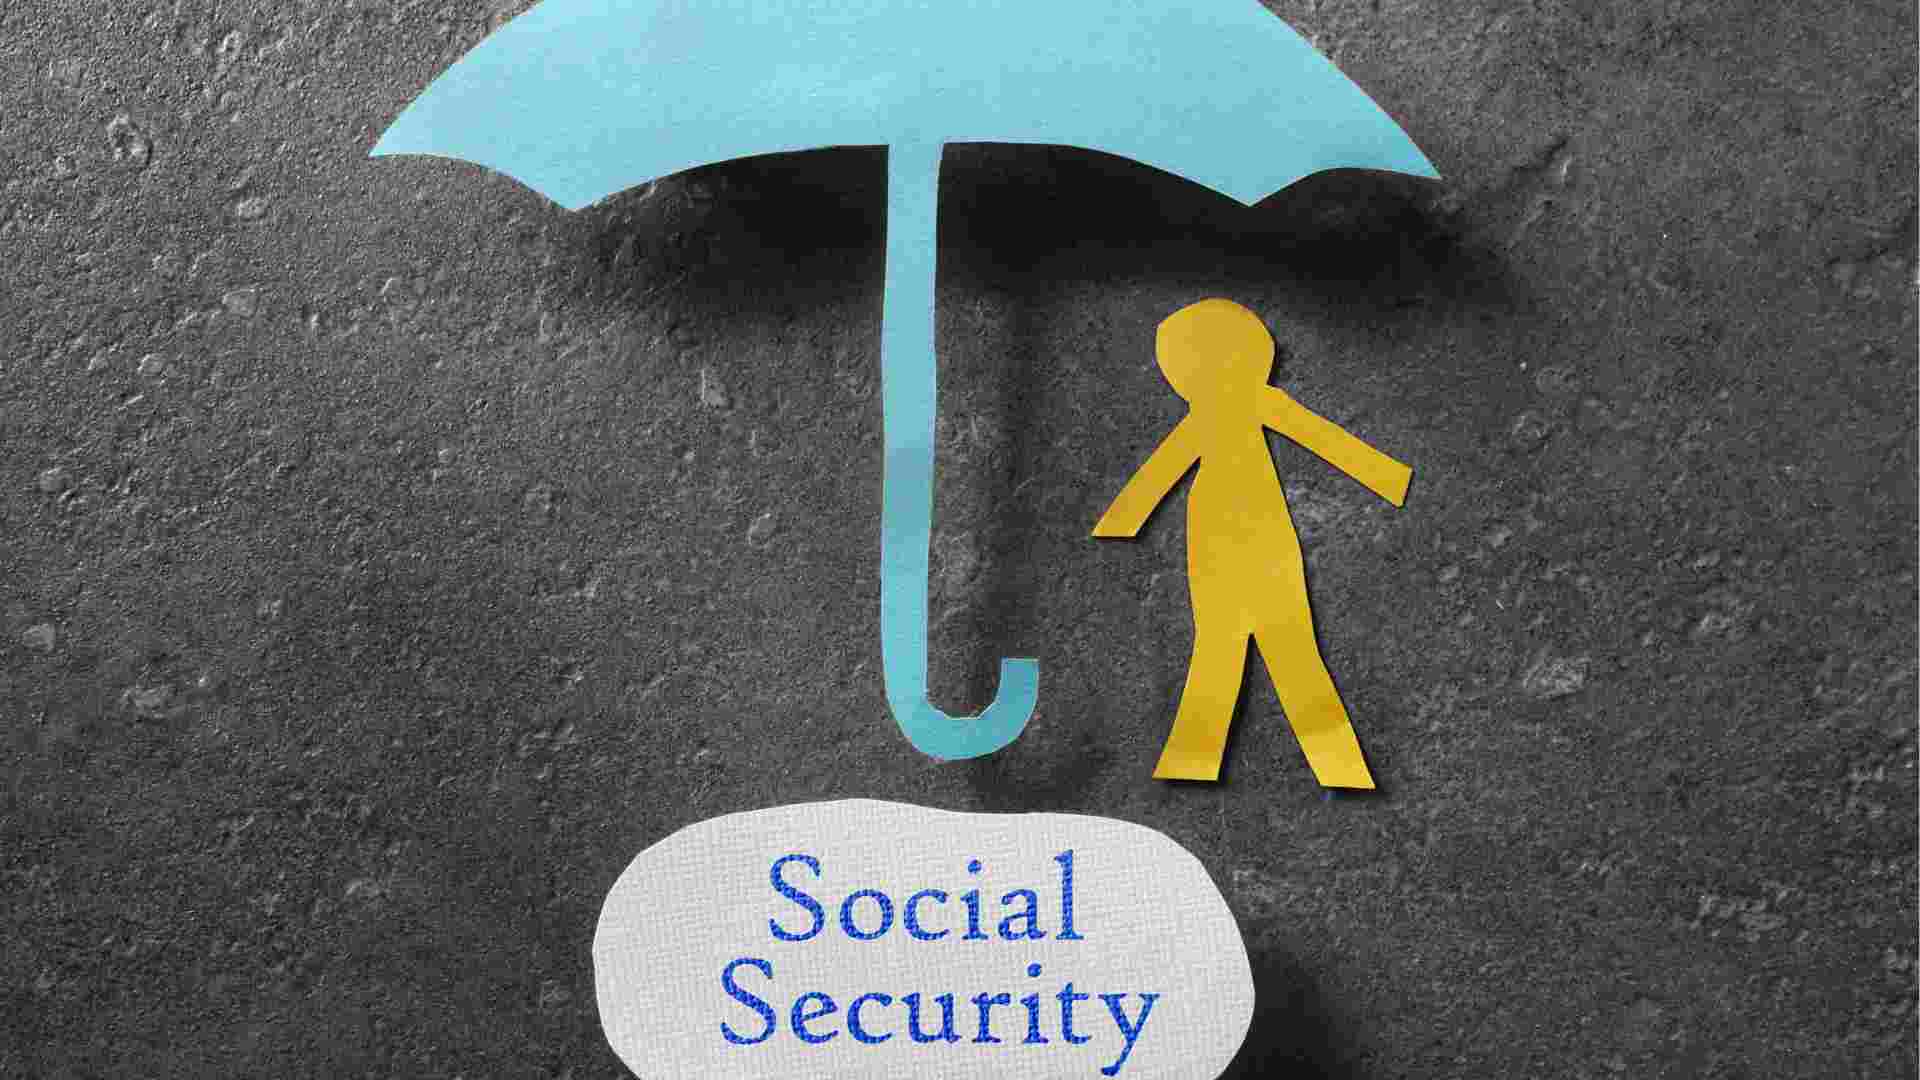 Social Security supports more than 71 million Americans, apply for benefits if you are eligible